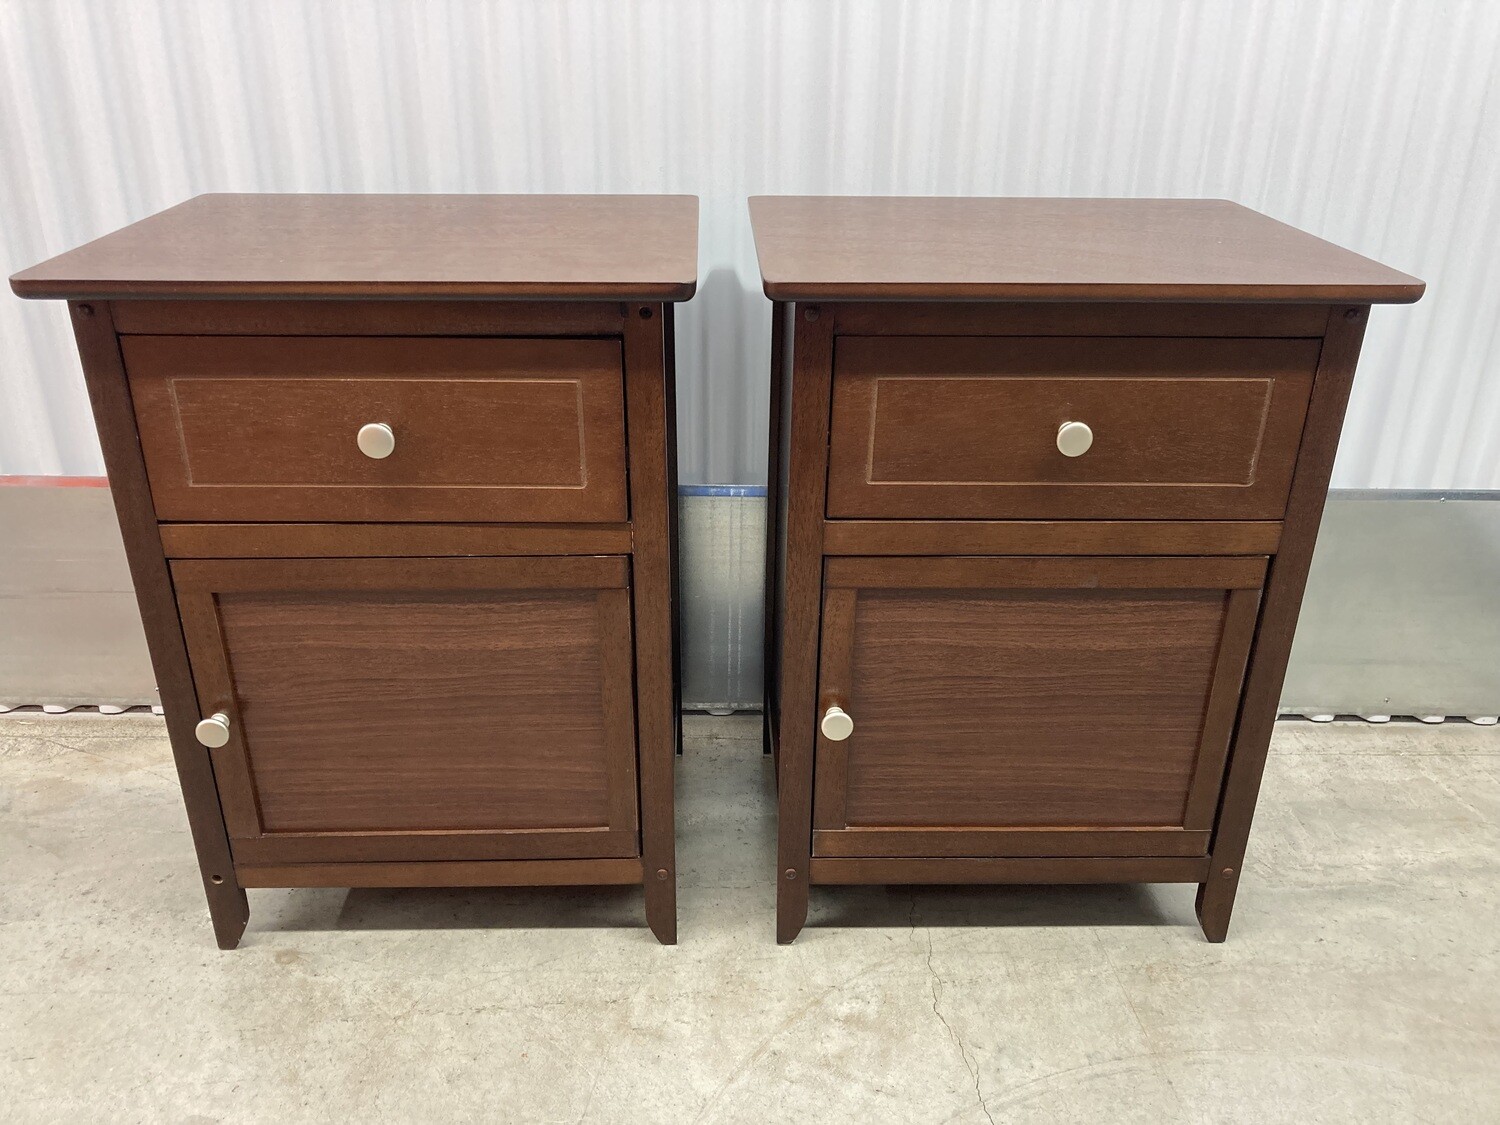 Pair of Bedside Tables with storage #2009